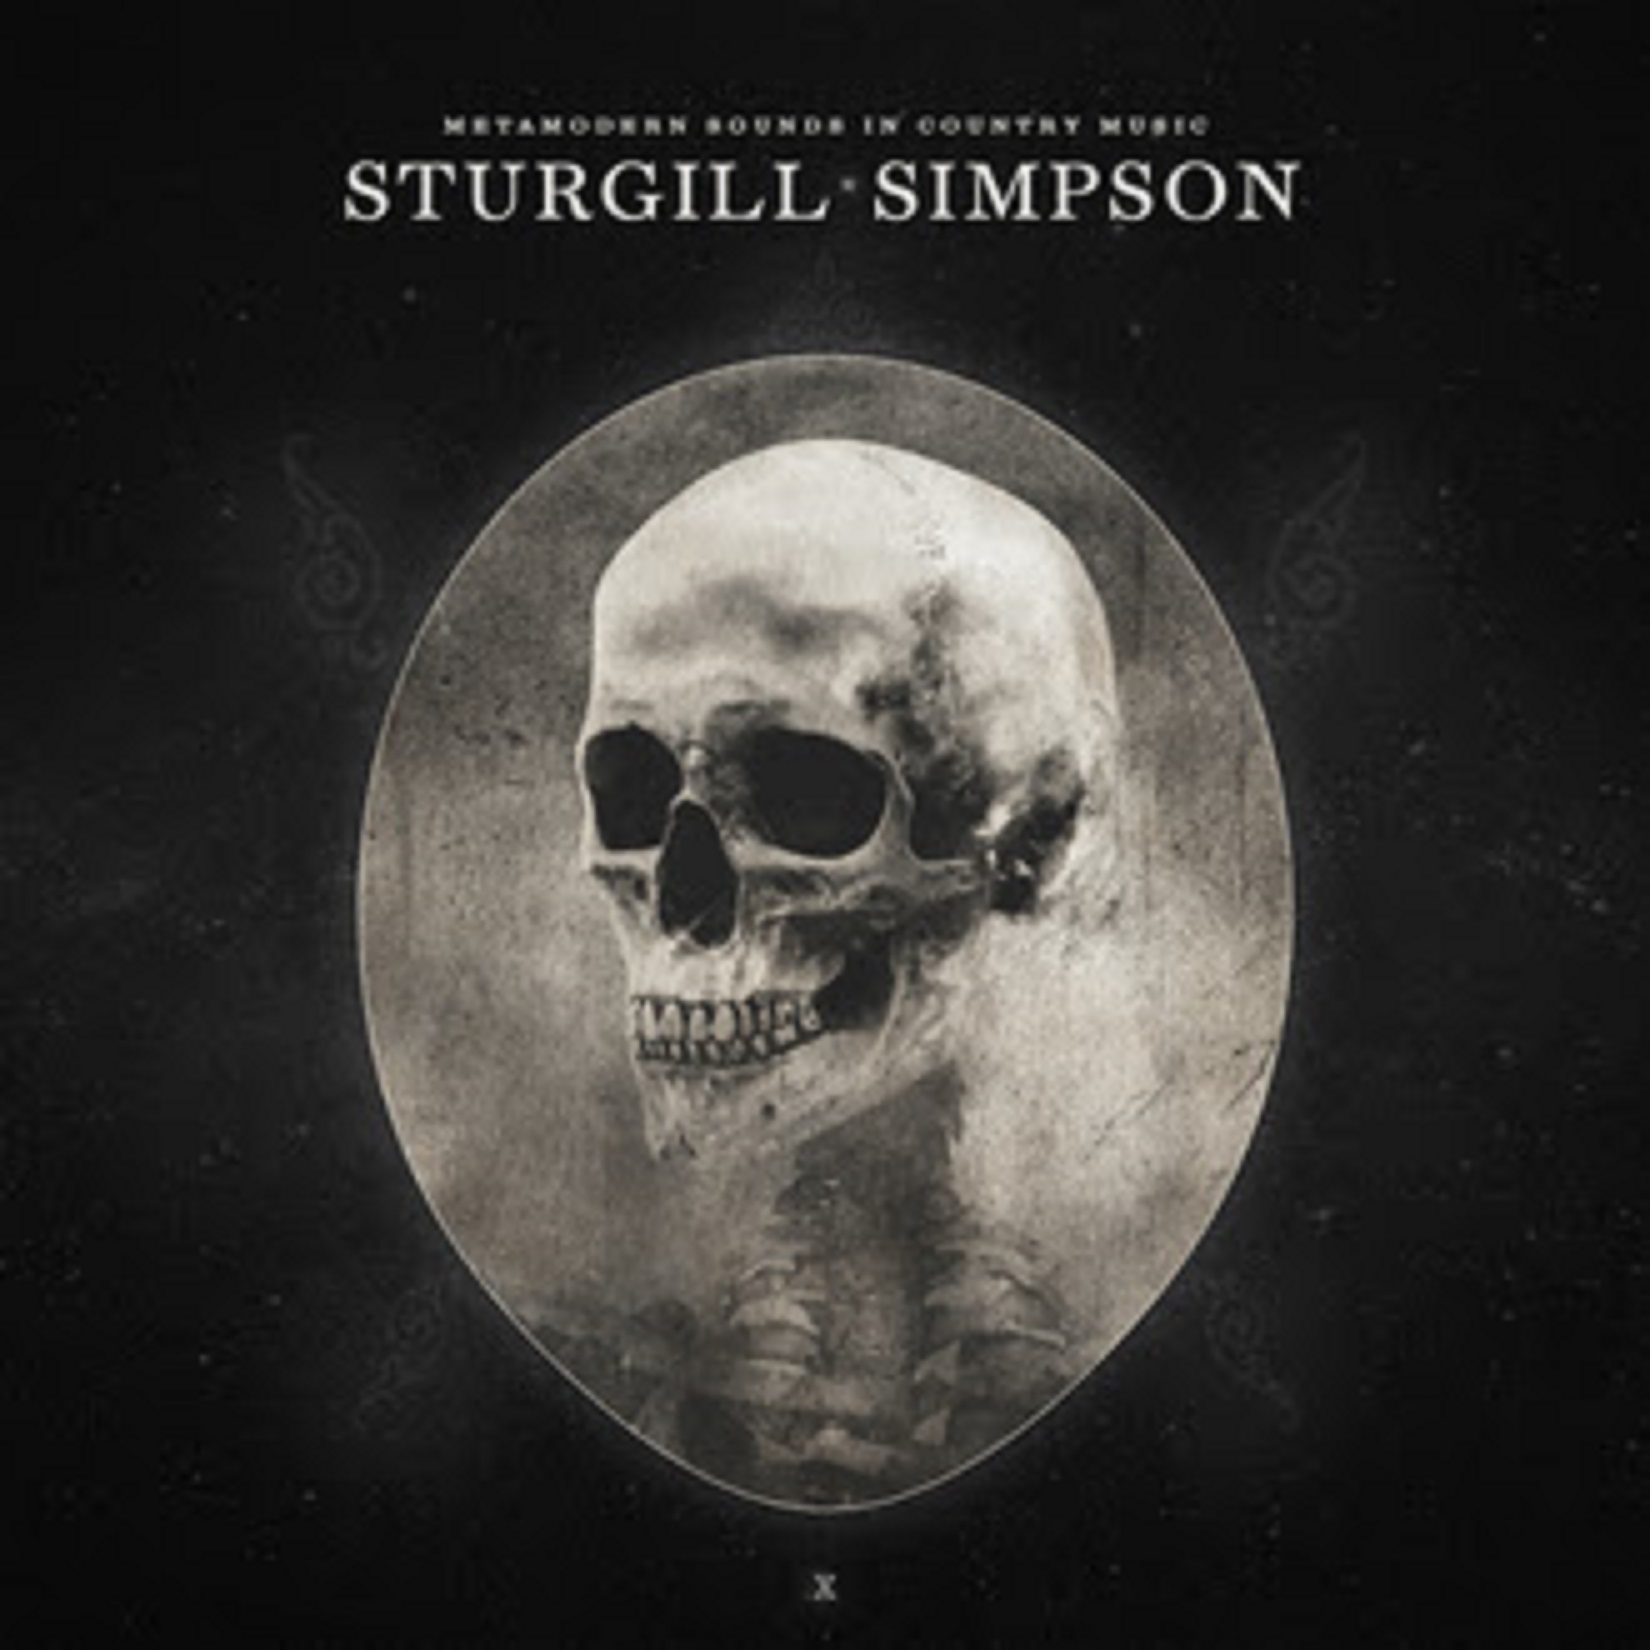 Sturgill Simpson’s "Metamodern Sounds In Country Music" celebrates tenth anniversary with special reissue out today